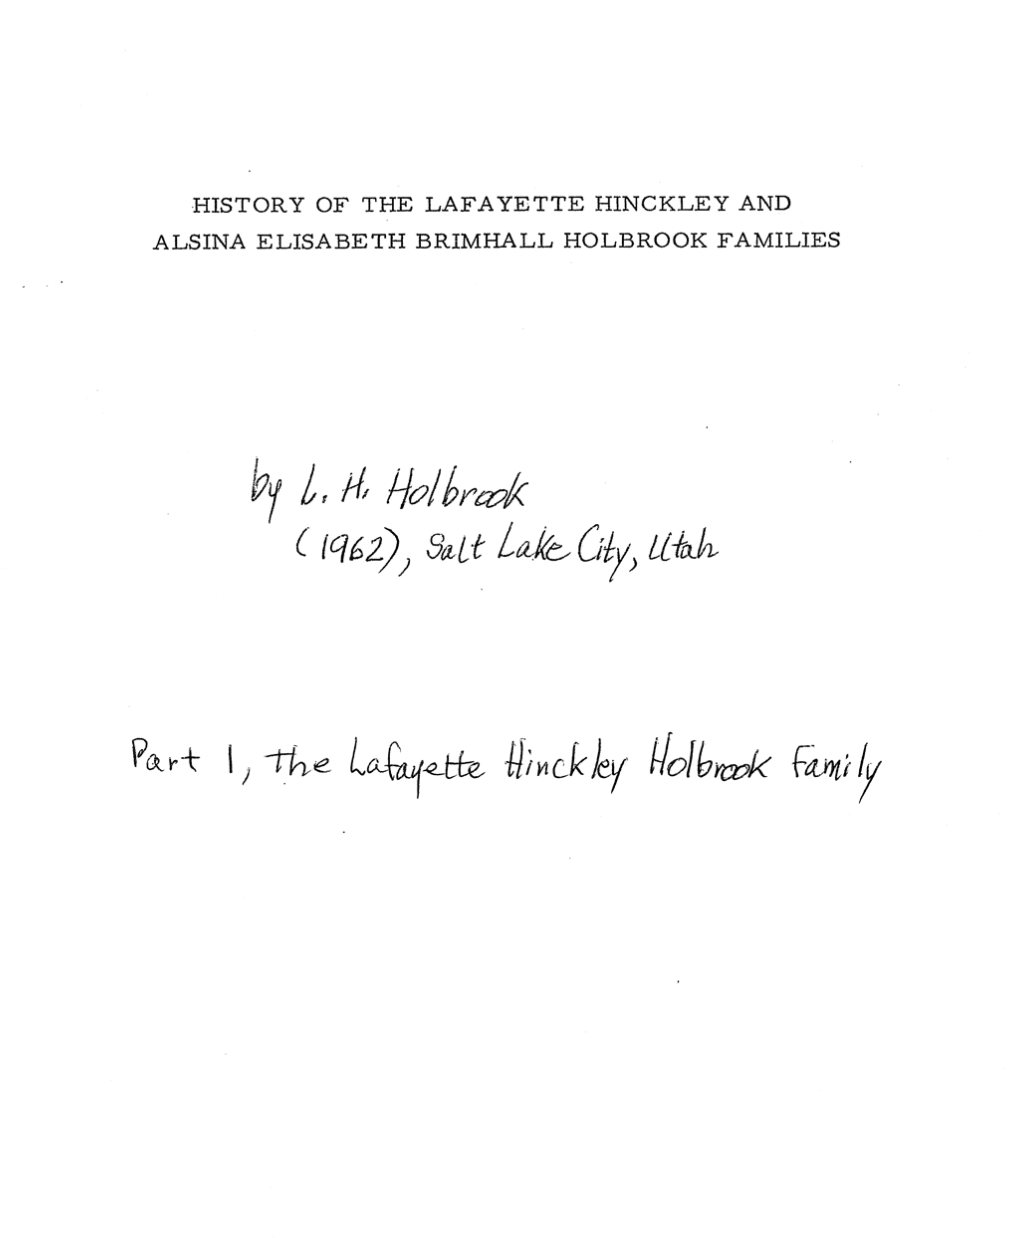 This is the front page of the attached file.